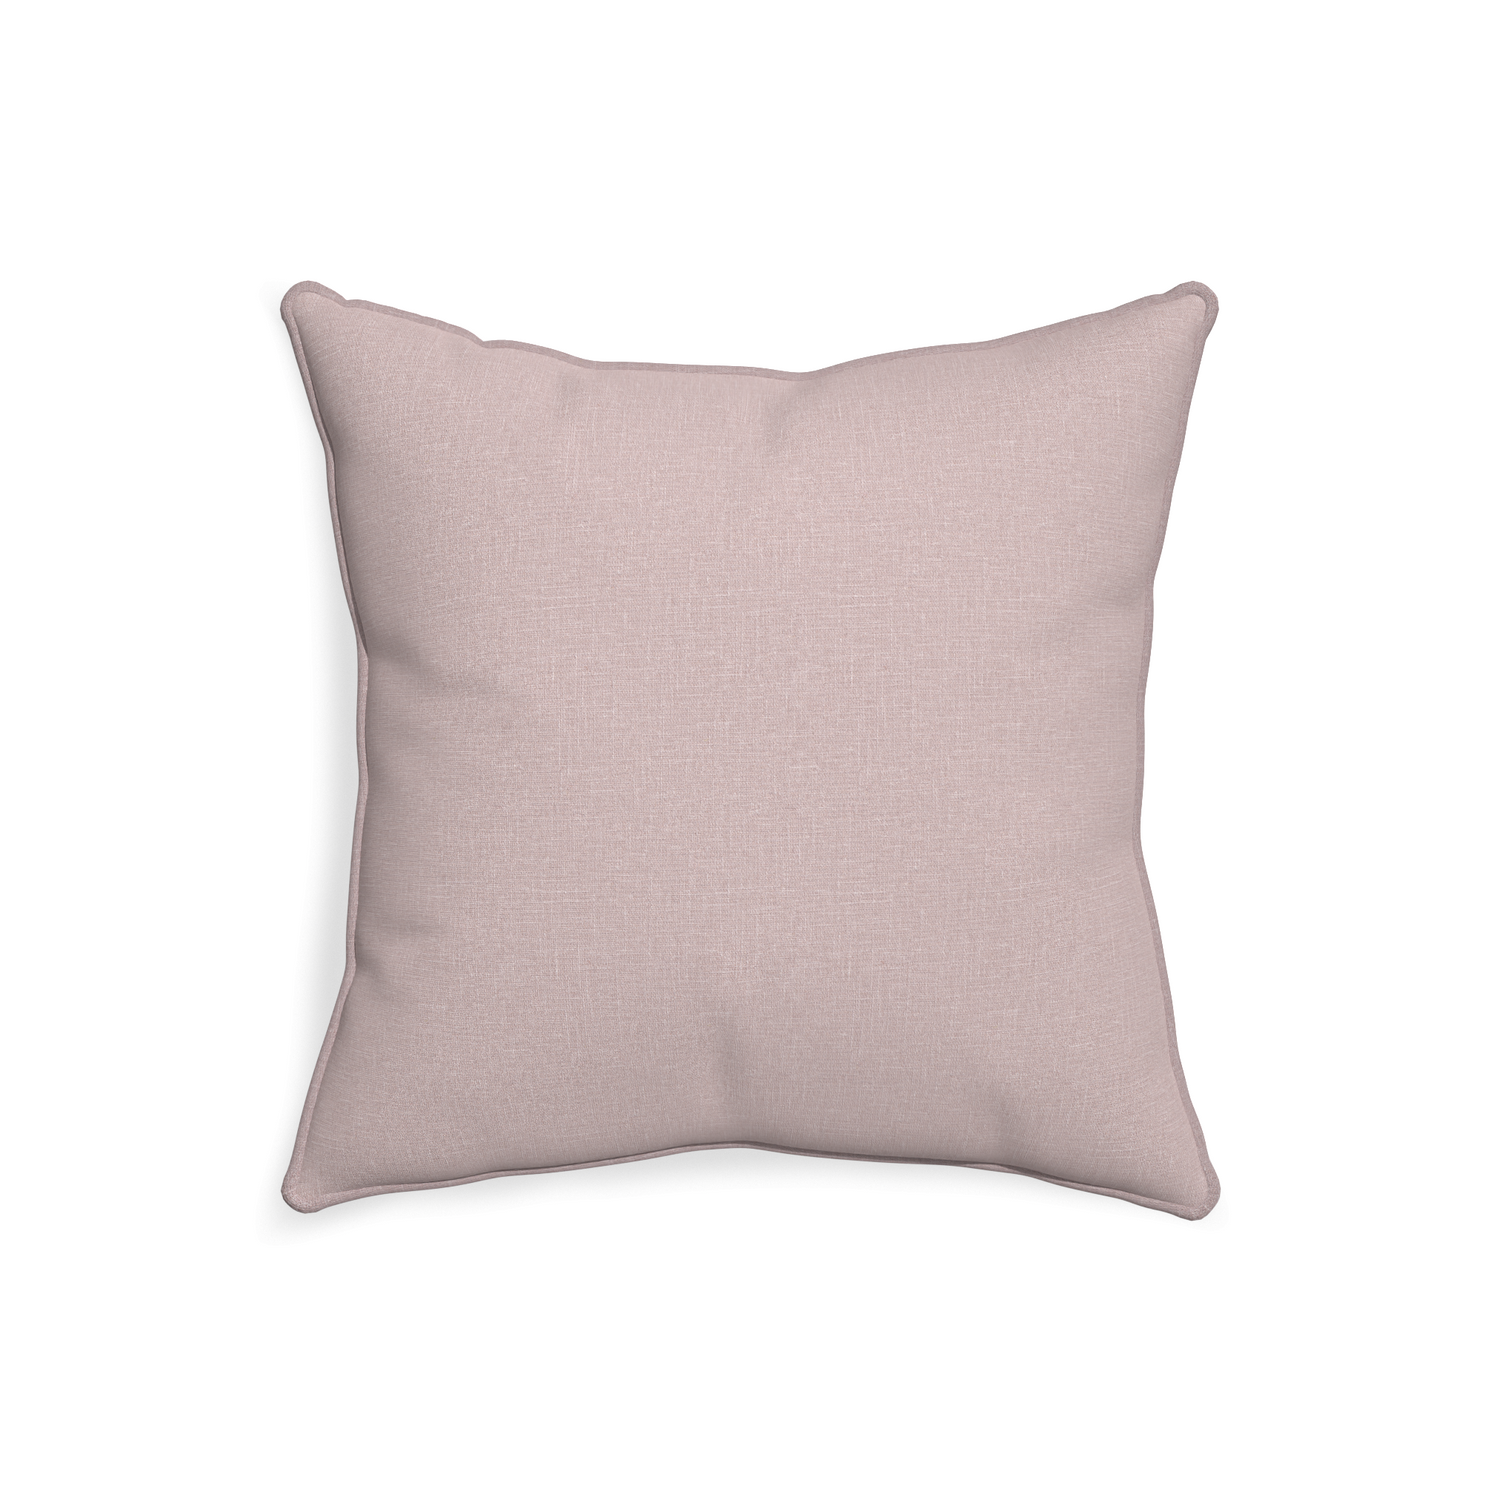 20-square orchid custom mauve pinkpillow with orchid piping on white background